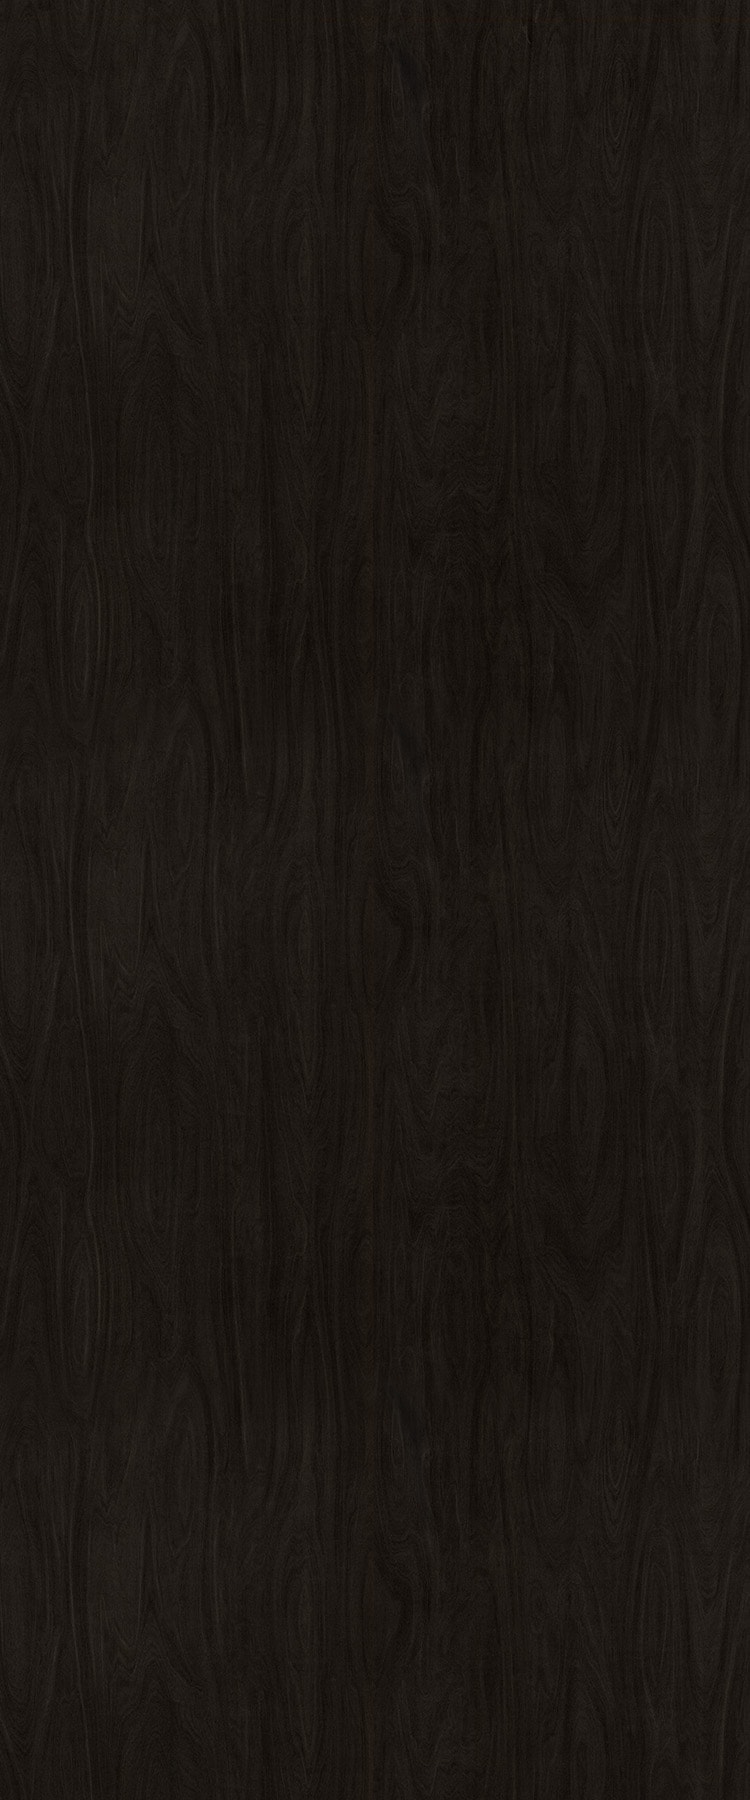 Formica 4 ft. x 8 ft. Laminate Sheet in Black Birchply with Premiumfx Natural Grain Finish